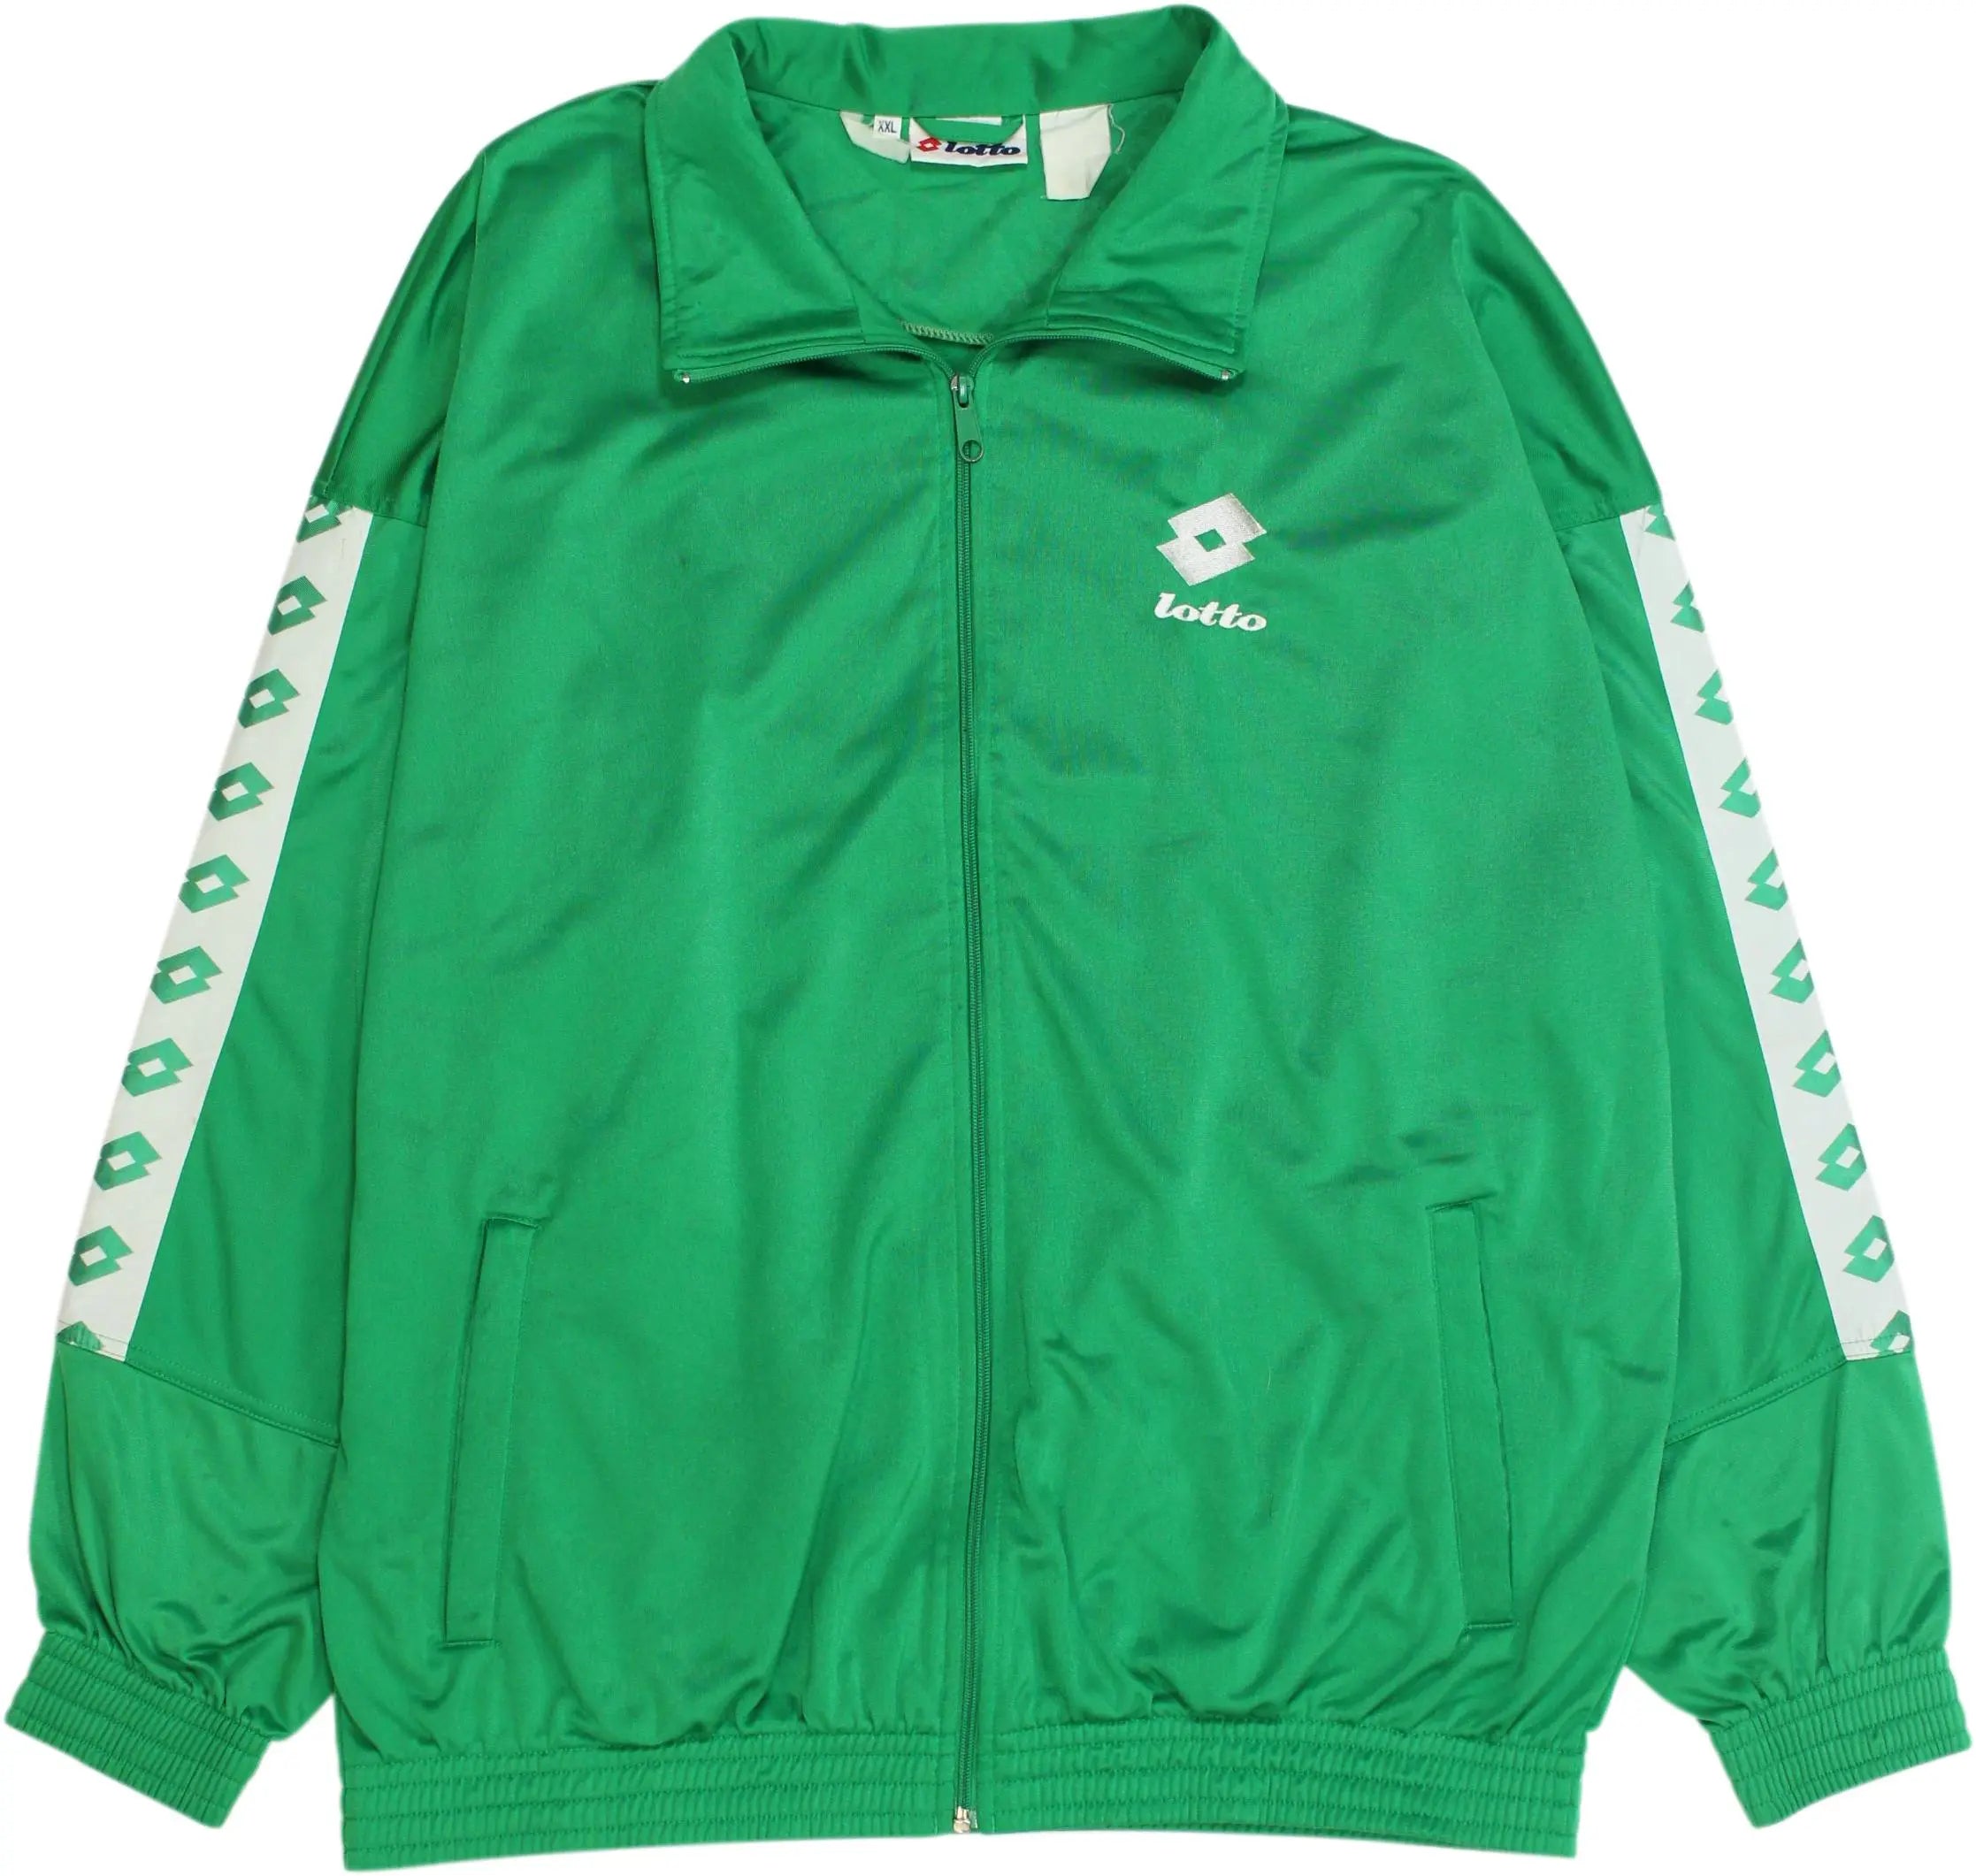 Lotto - 90s/00s Green Track Jacket by Lotto- ThriftTale.com - Vintage and second handclothing